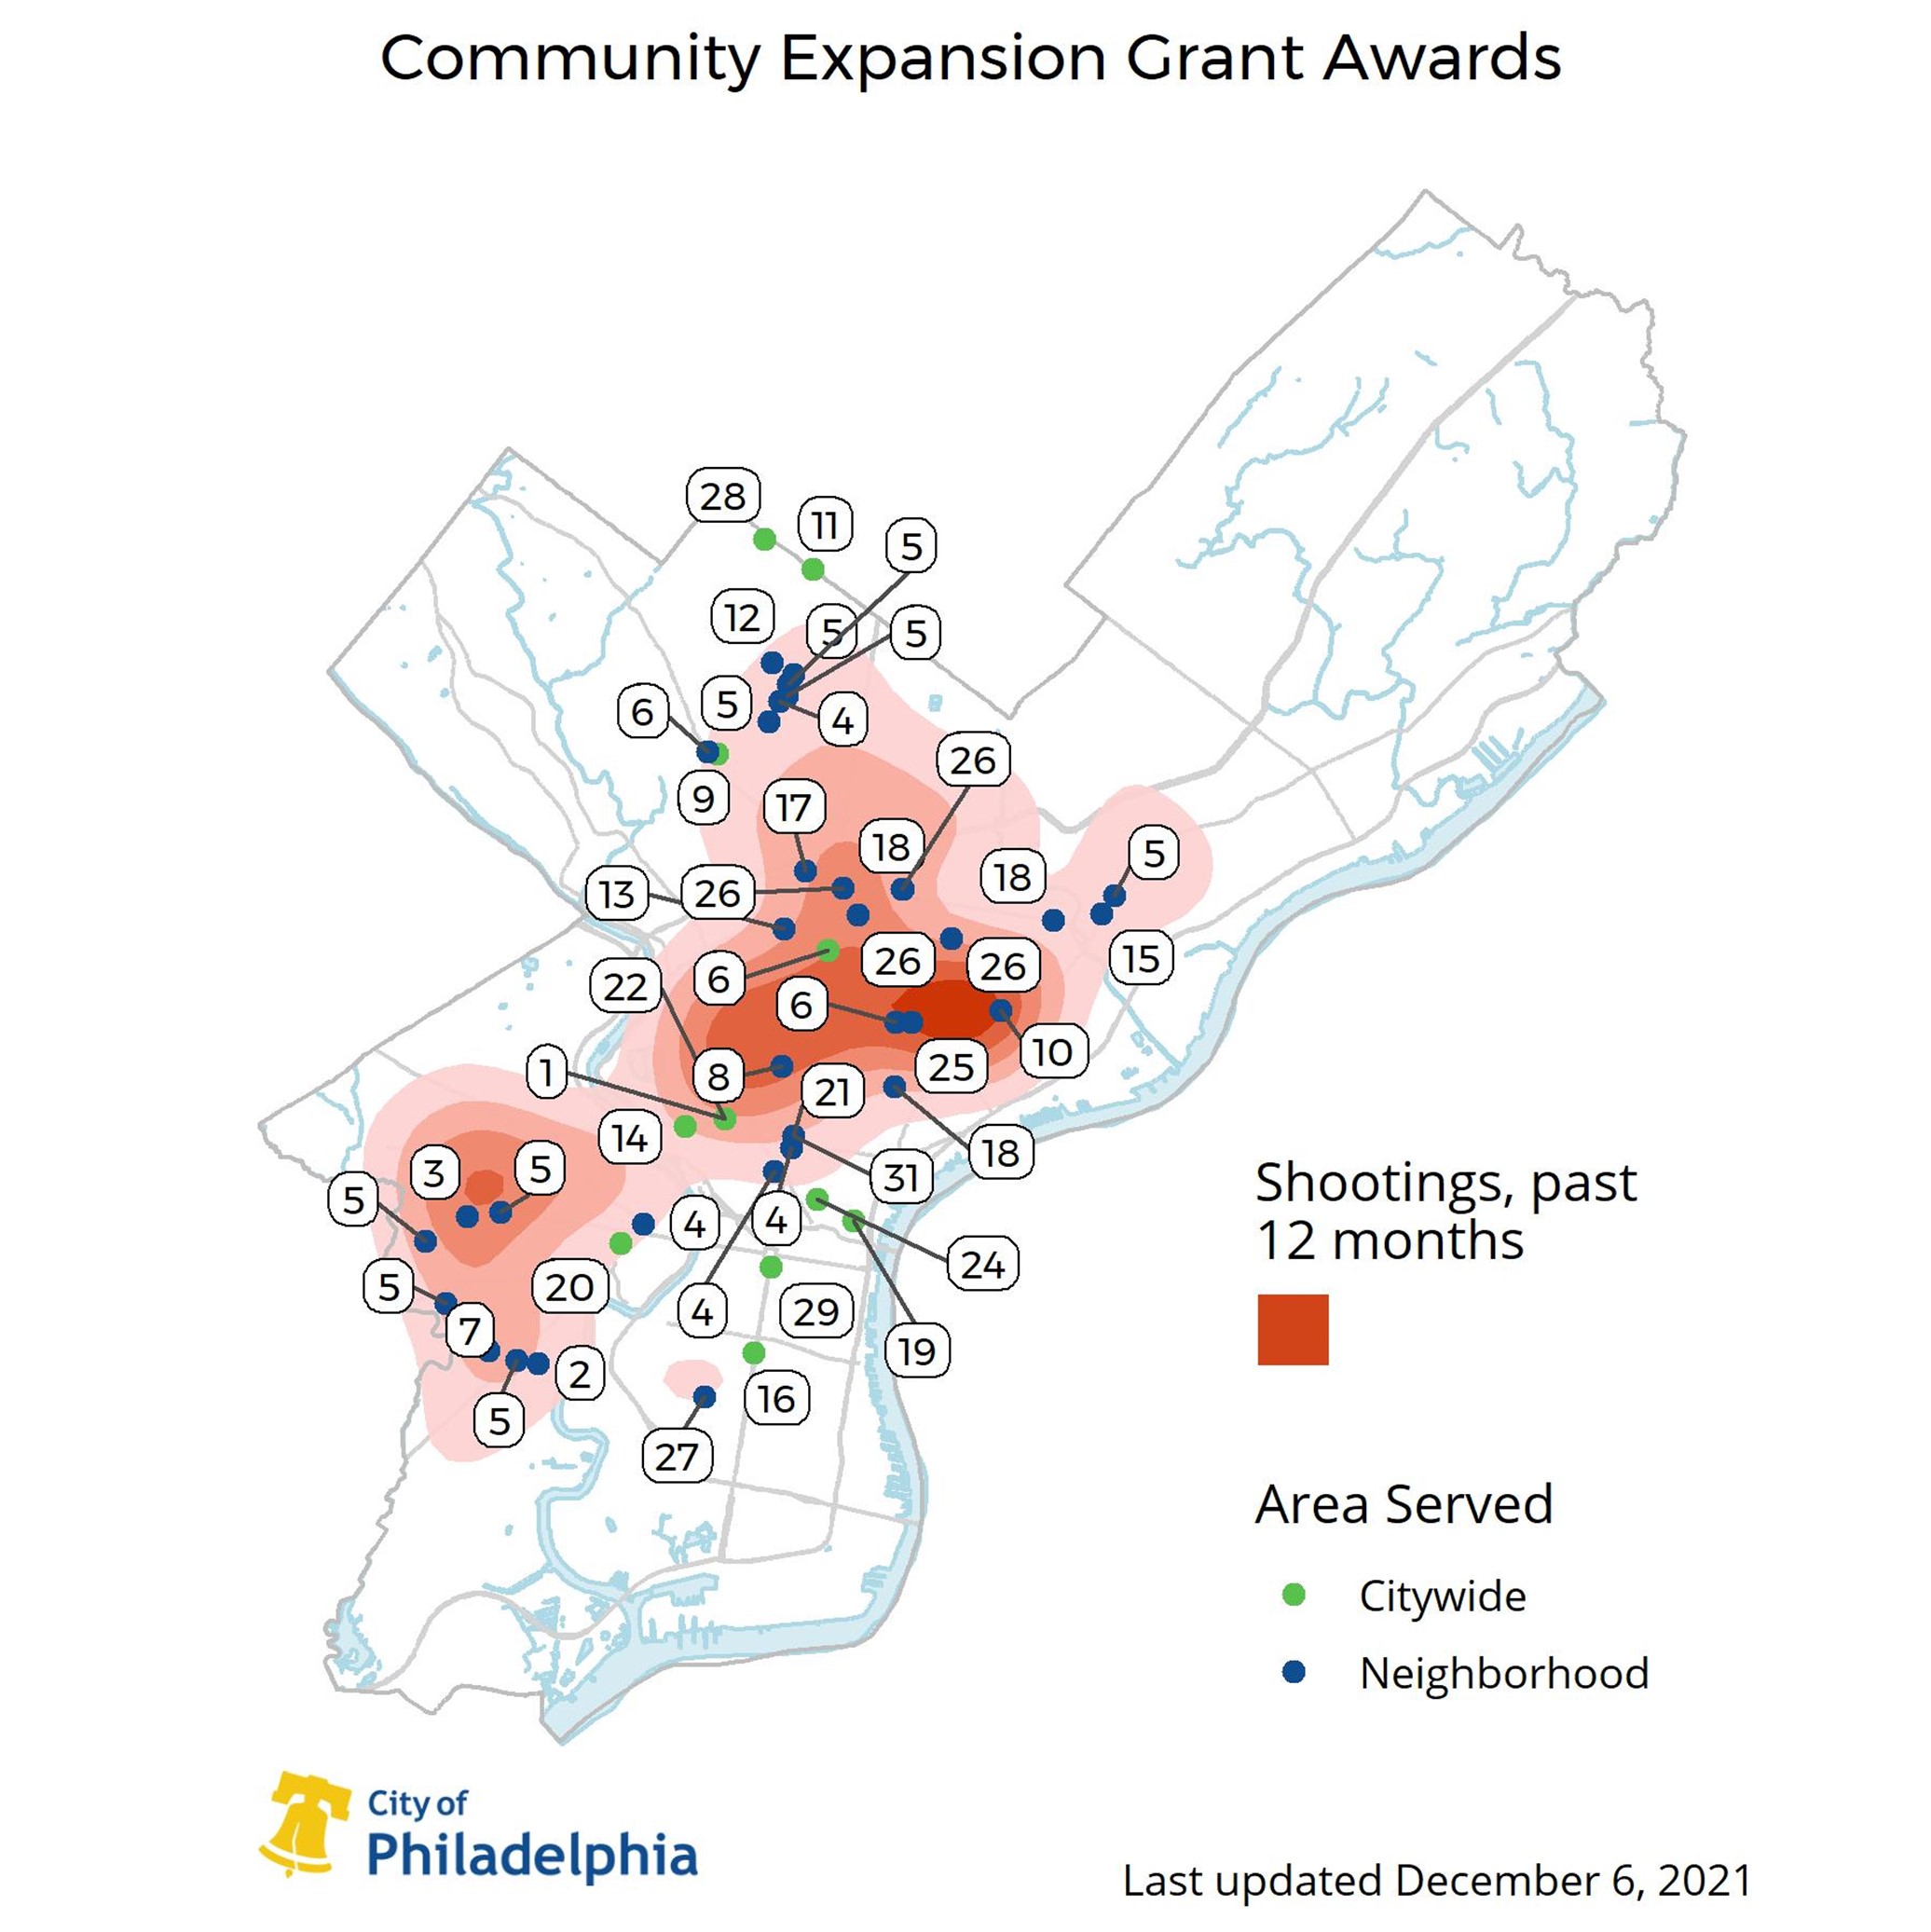 A map of Philadelphia displaying a heat map that shows the geographic breakdown of all 31 awards made from this grant program.